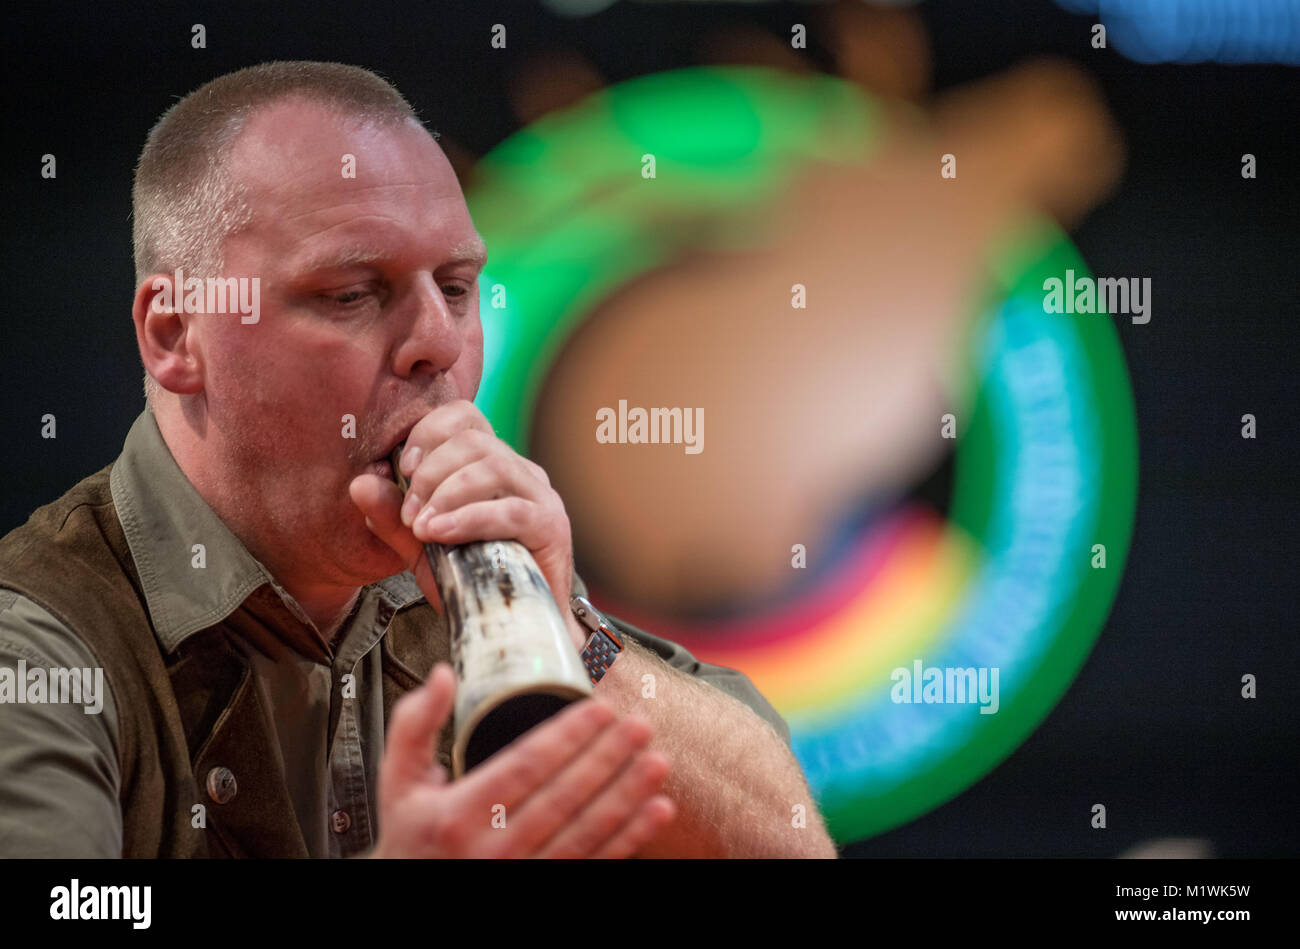 Dortmund, Germany. 2nd Feb, 2018. Winner Enrico Braun from Wittstock in Brandenburg blows into his instrument at the 20th German Championship of Stag-Calling in Dortmund, Germany, 2 February 2018. The art of stag-calling is part of the traditional vocation of the huntsman. Credit: Bernd Thissen/dpa/Alamy Live News Stock Photo